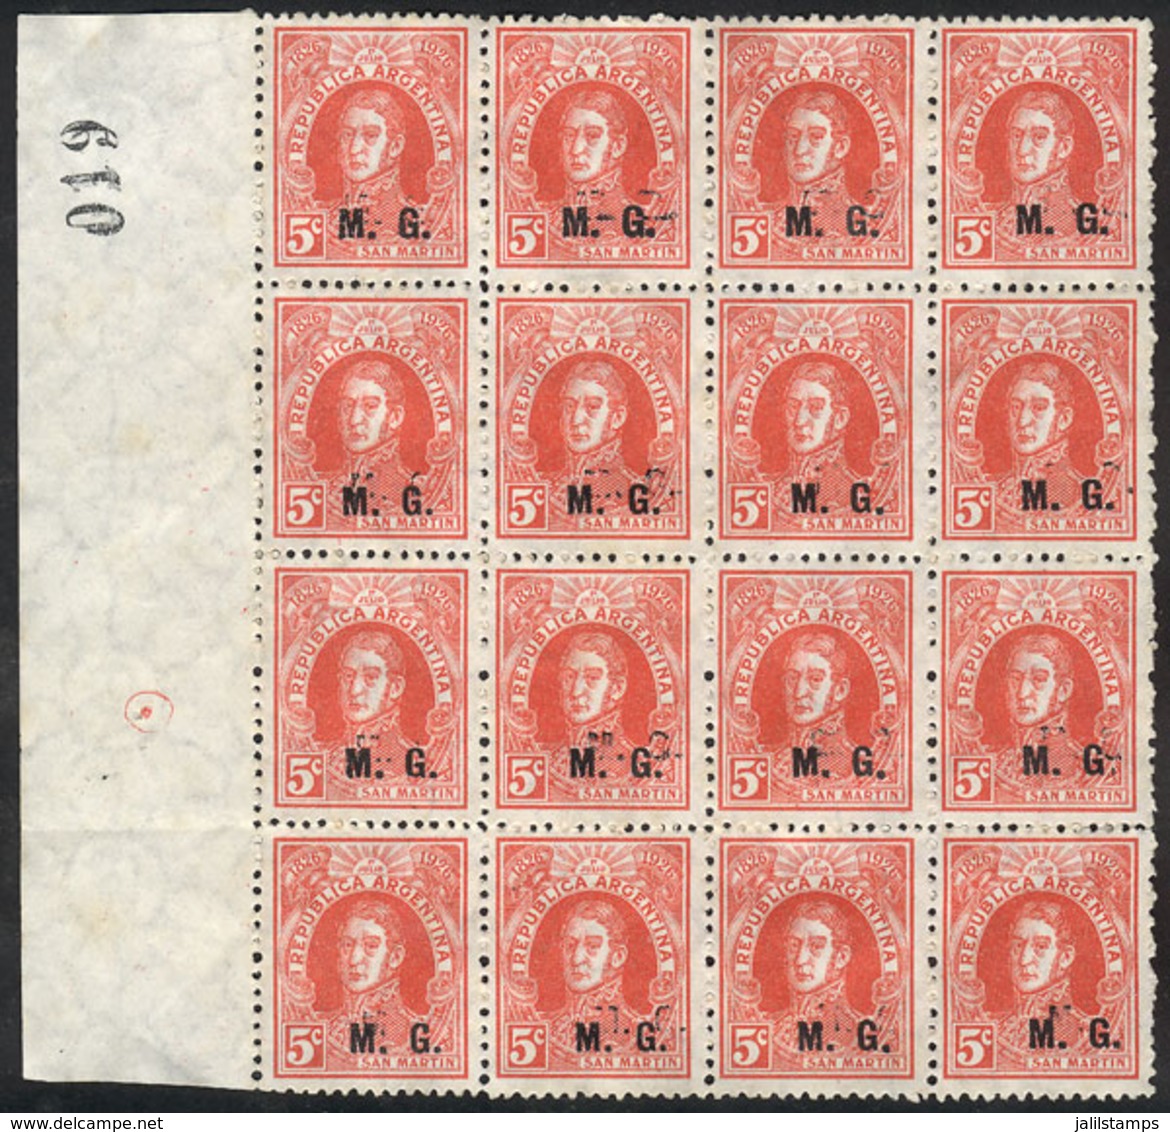 ARGENTINA: GJ.191a, With DOUBLE IMPRESSION Variety Of The Overprint (one Light), Mint Without Gum, Fine Quality, Rare! - Service